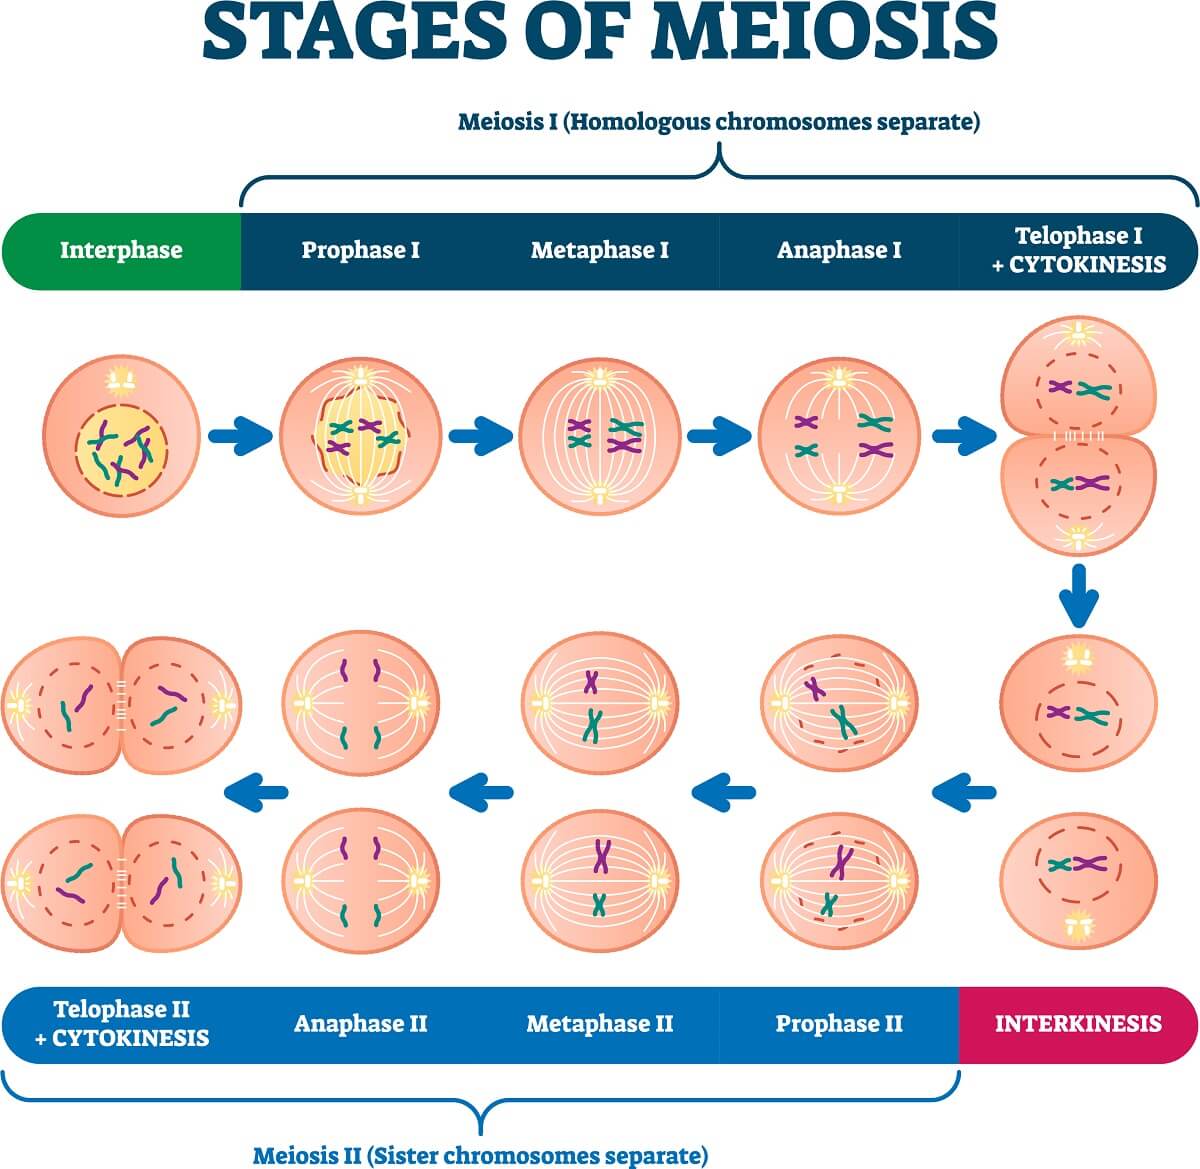 The stages of meiosis physically separate copies of each gene, leading to Mendel’s laws